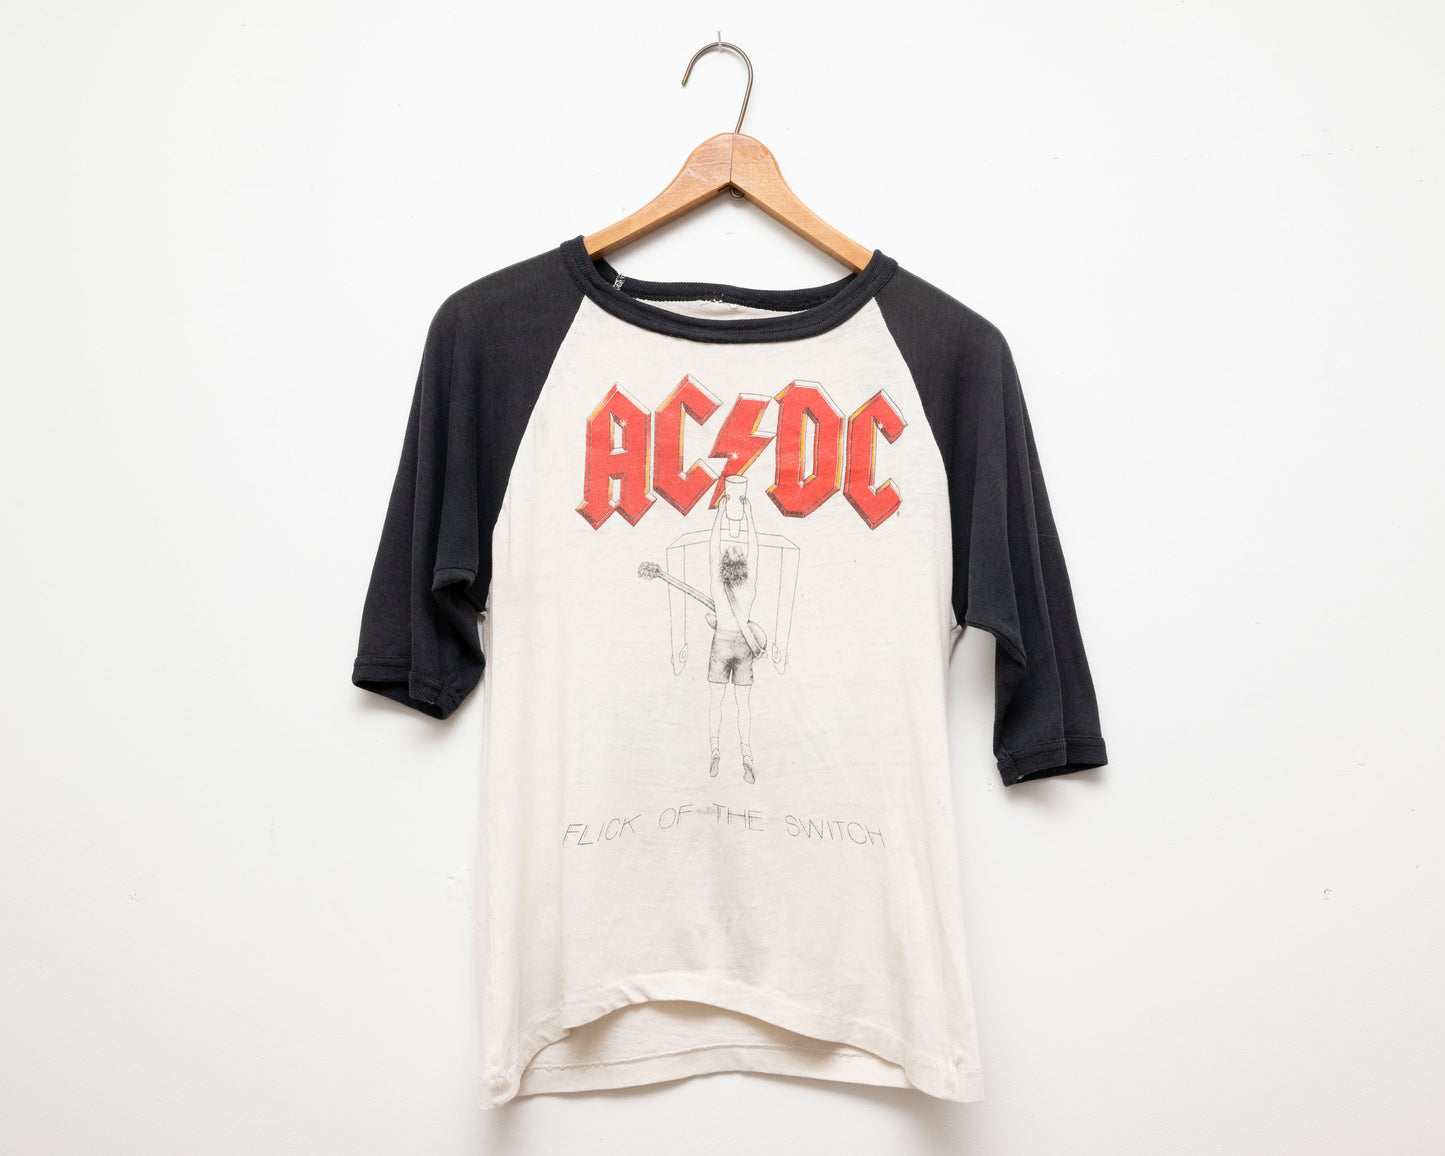 AC/DC Flick of the Switch vintage t-shirt raglan sleeves tour